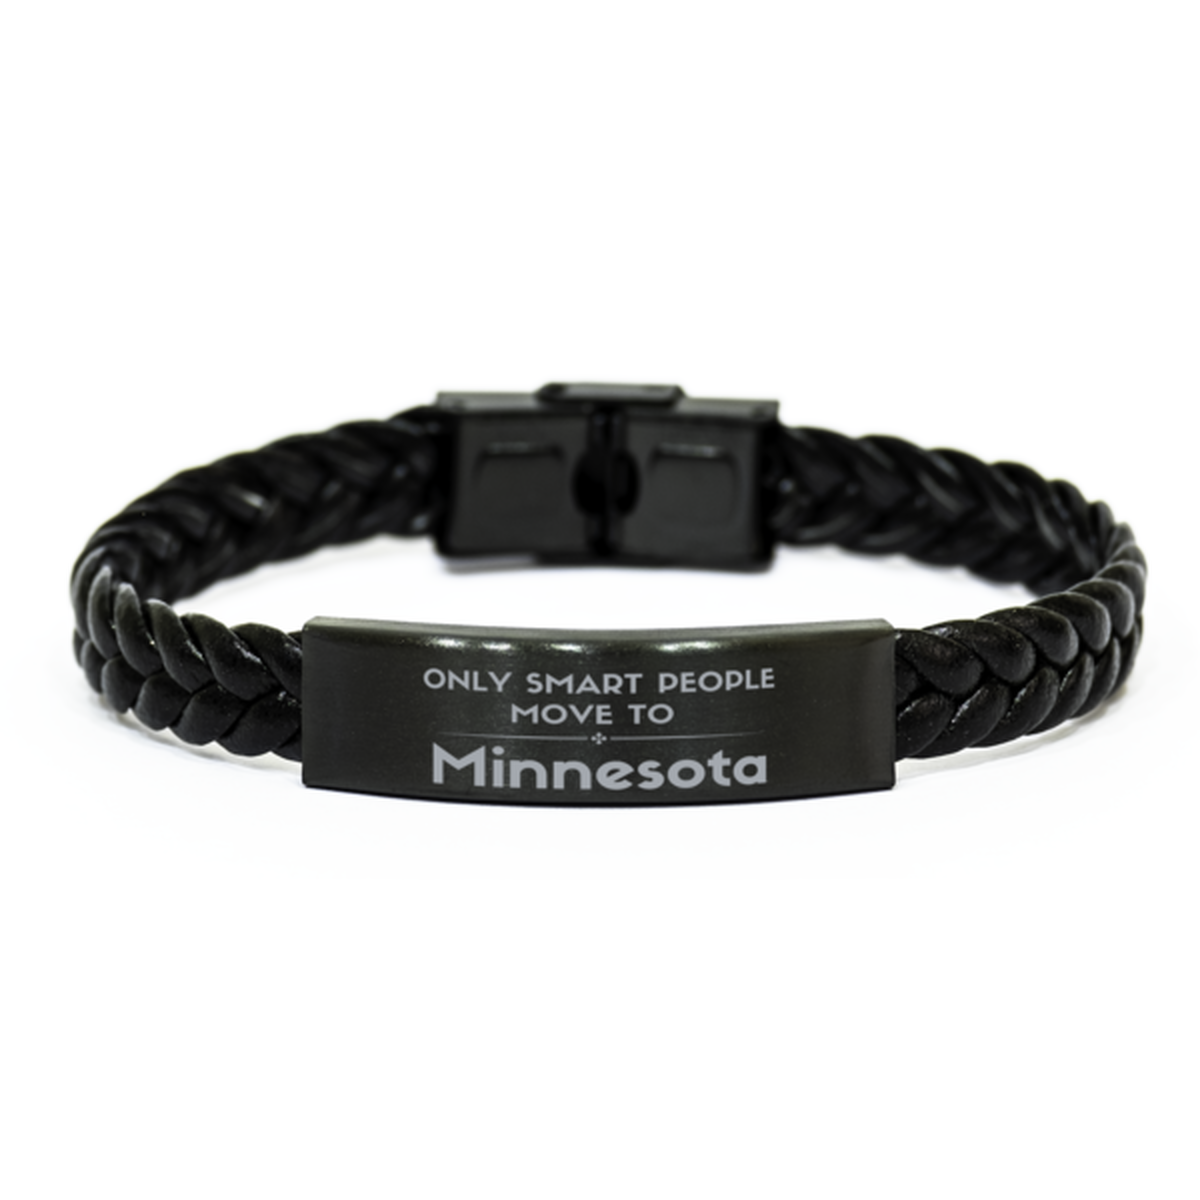 Only smart people move to Minnesota Braided Leather Bracelet, Gag Gifts For Minnesota, Move to Minnesota Gifts for Friends Coworker Funny Saying Quote